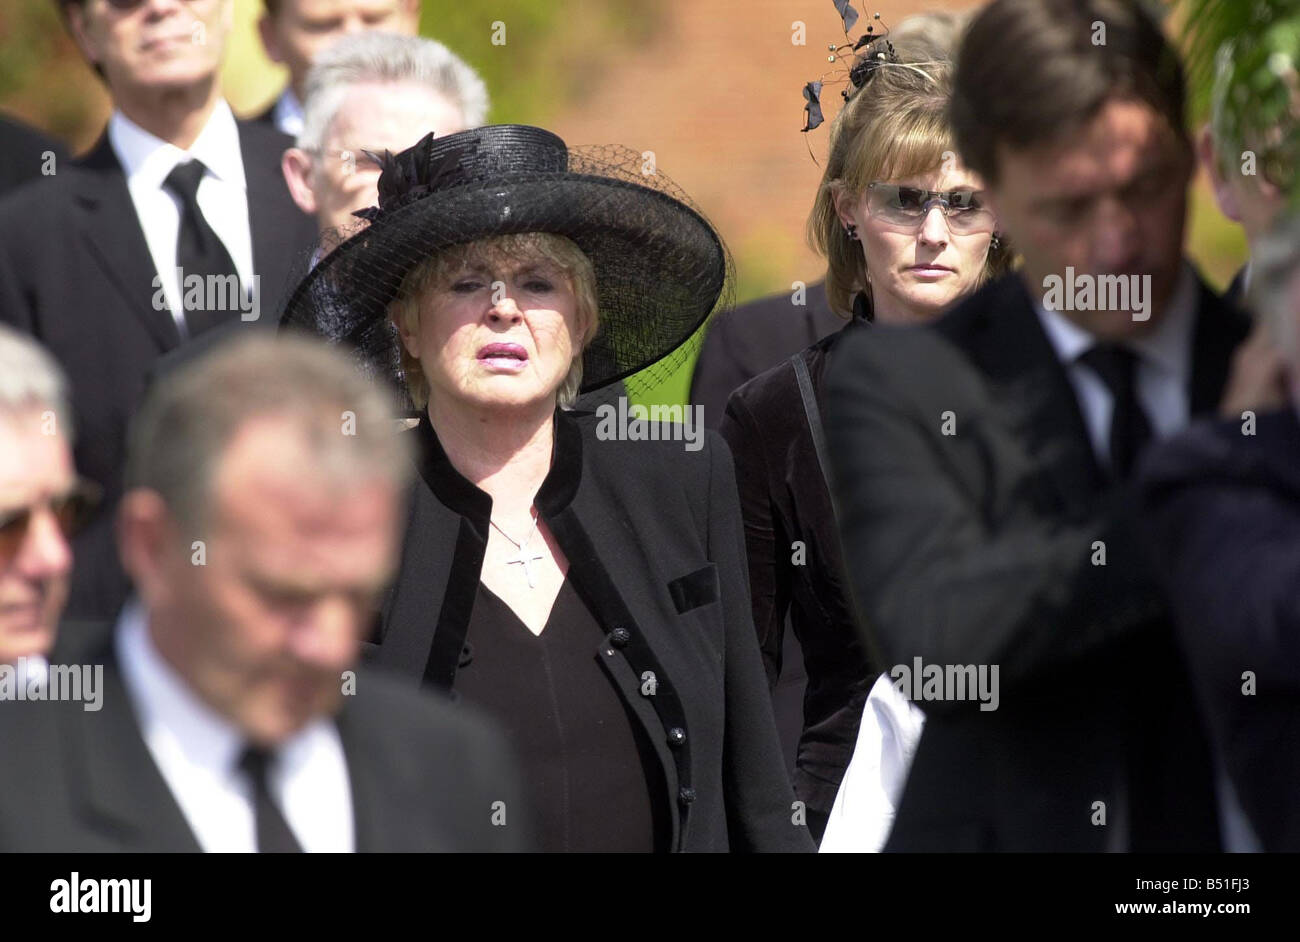 Caron Keating Funeral April 2004 St Peters Church in the grounds of Hever Castle in Kent Picture shows mother Gloria Hunniford pallbearer Richard Madeley Stock Photo